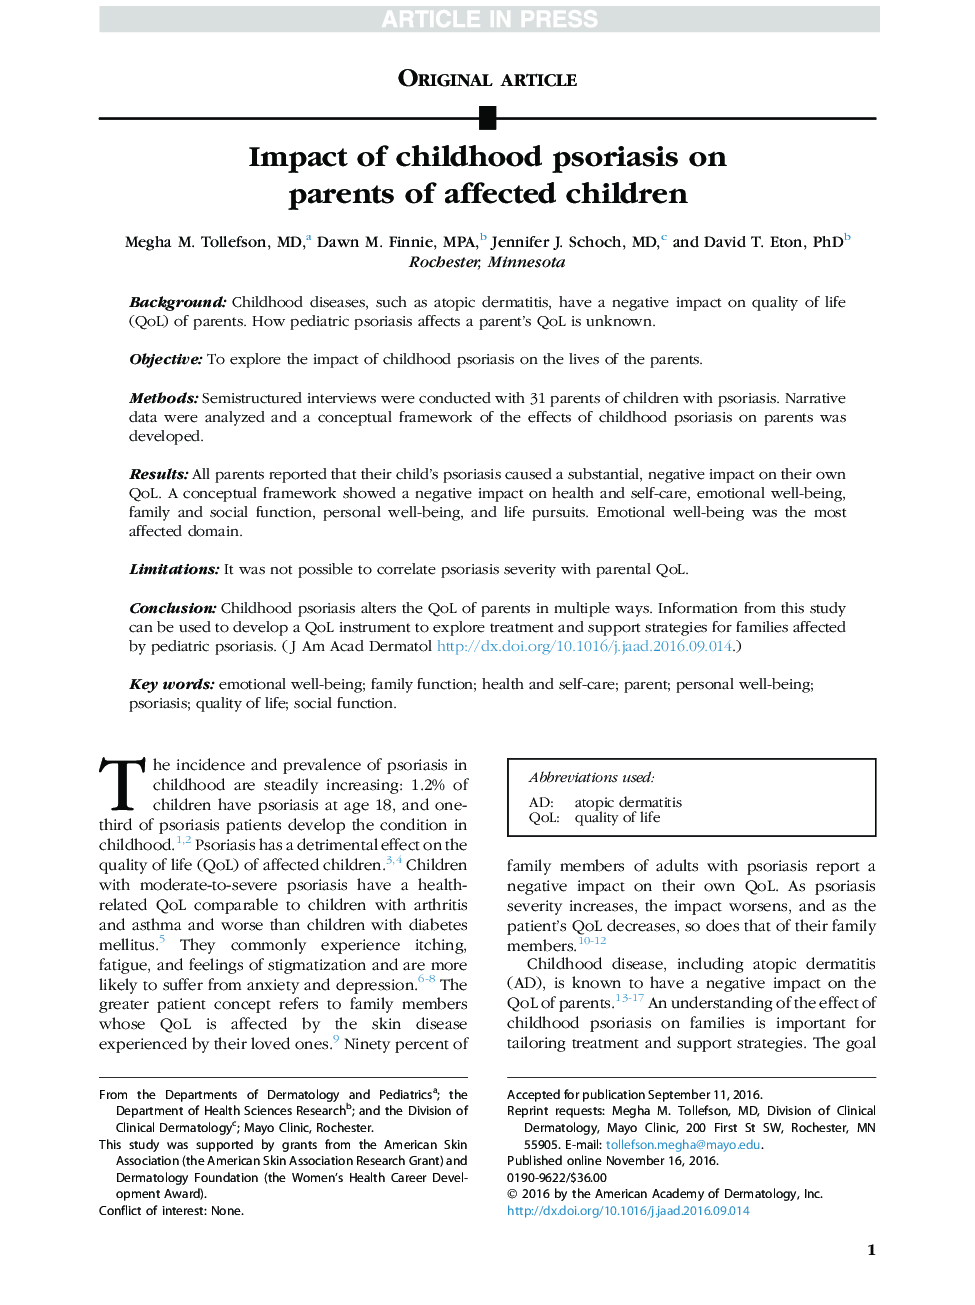 Impact of childhood psoriasis on parents of affected children